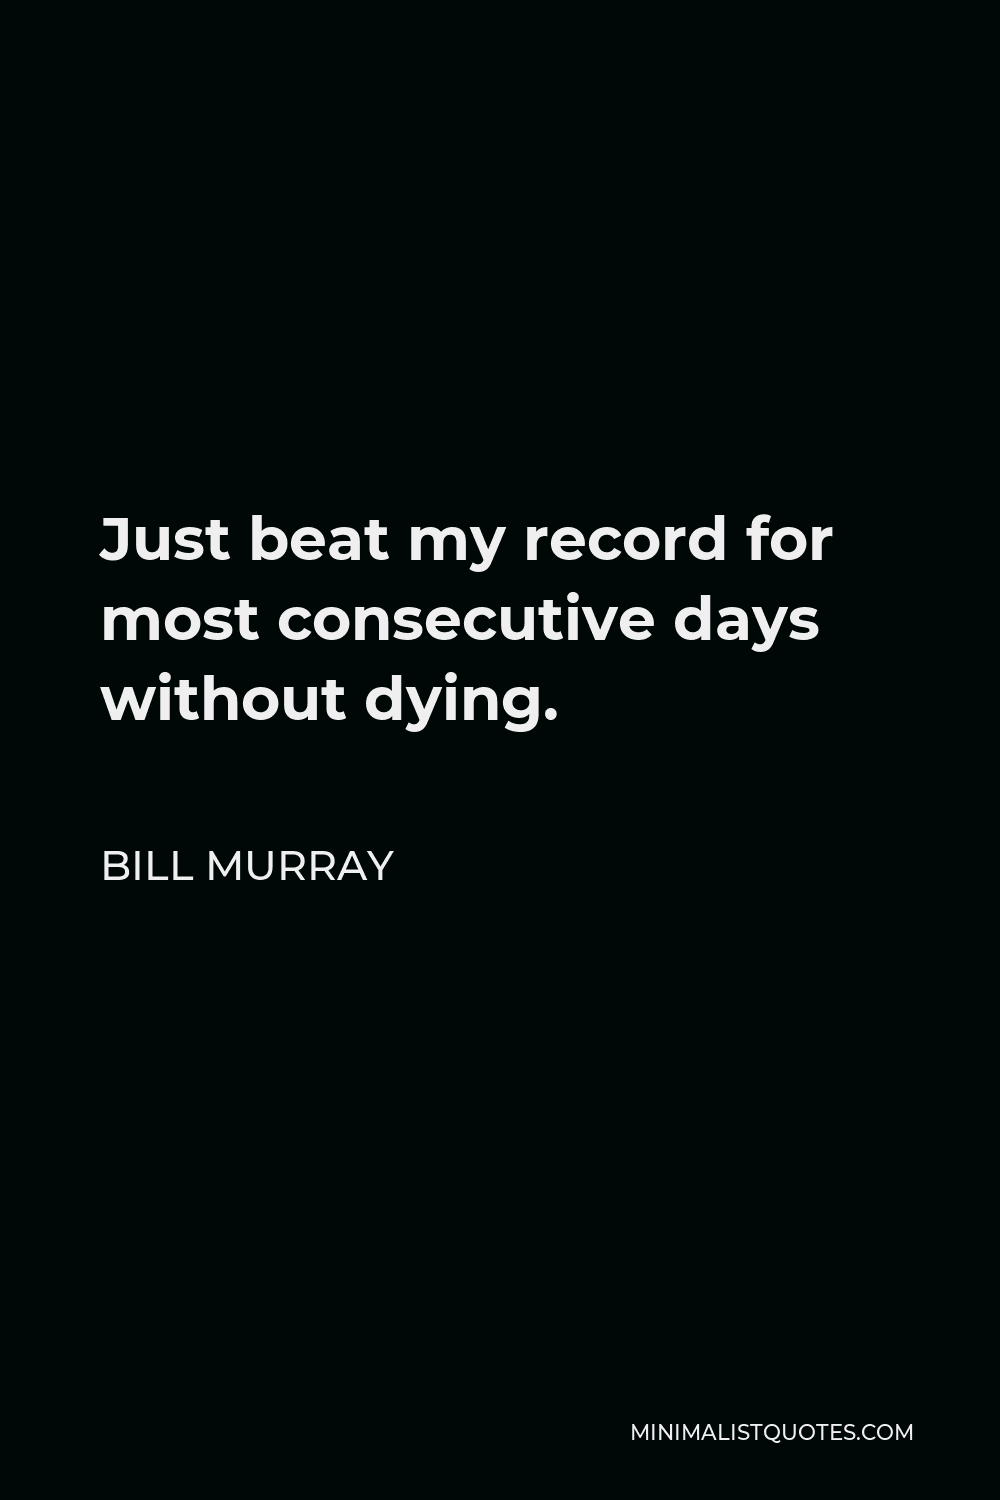 Bill Murray Quote - Just beat my record for most consecutive days without dying.